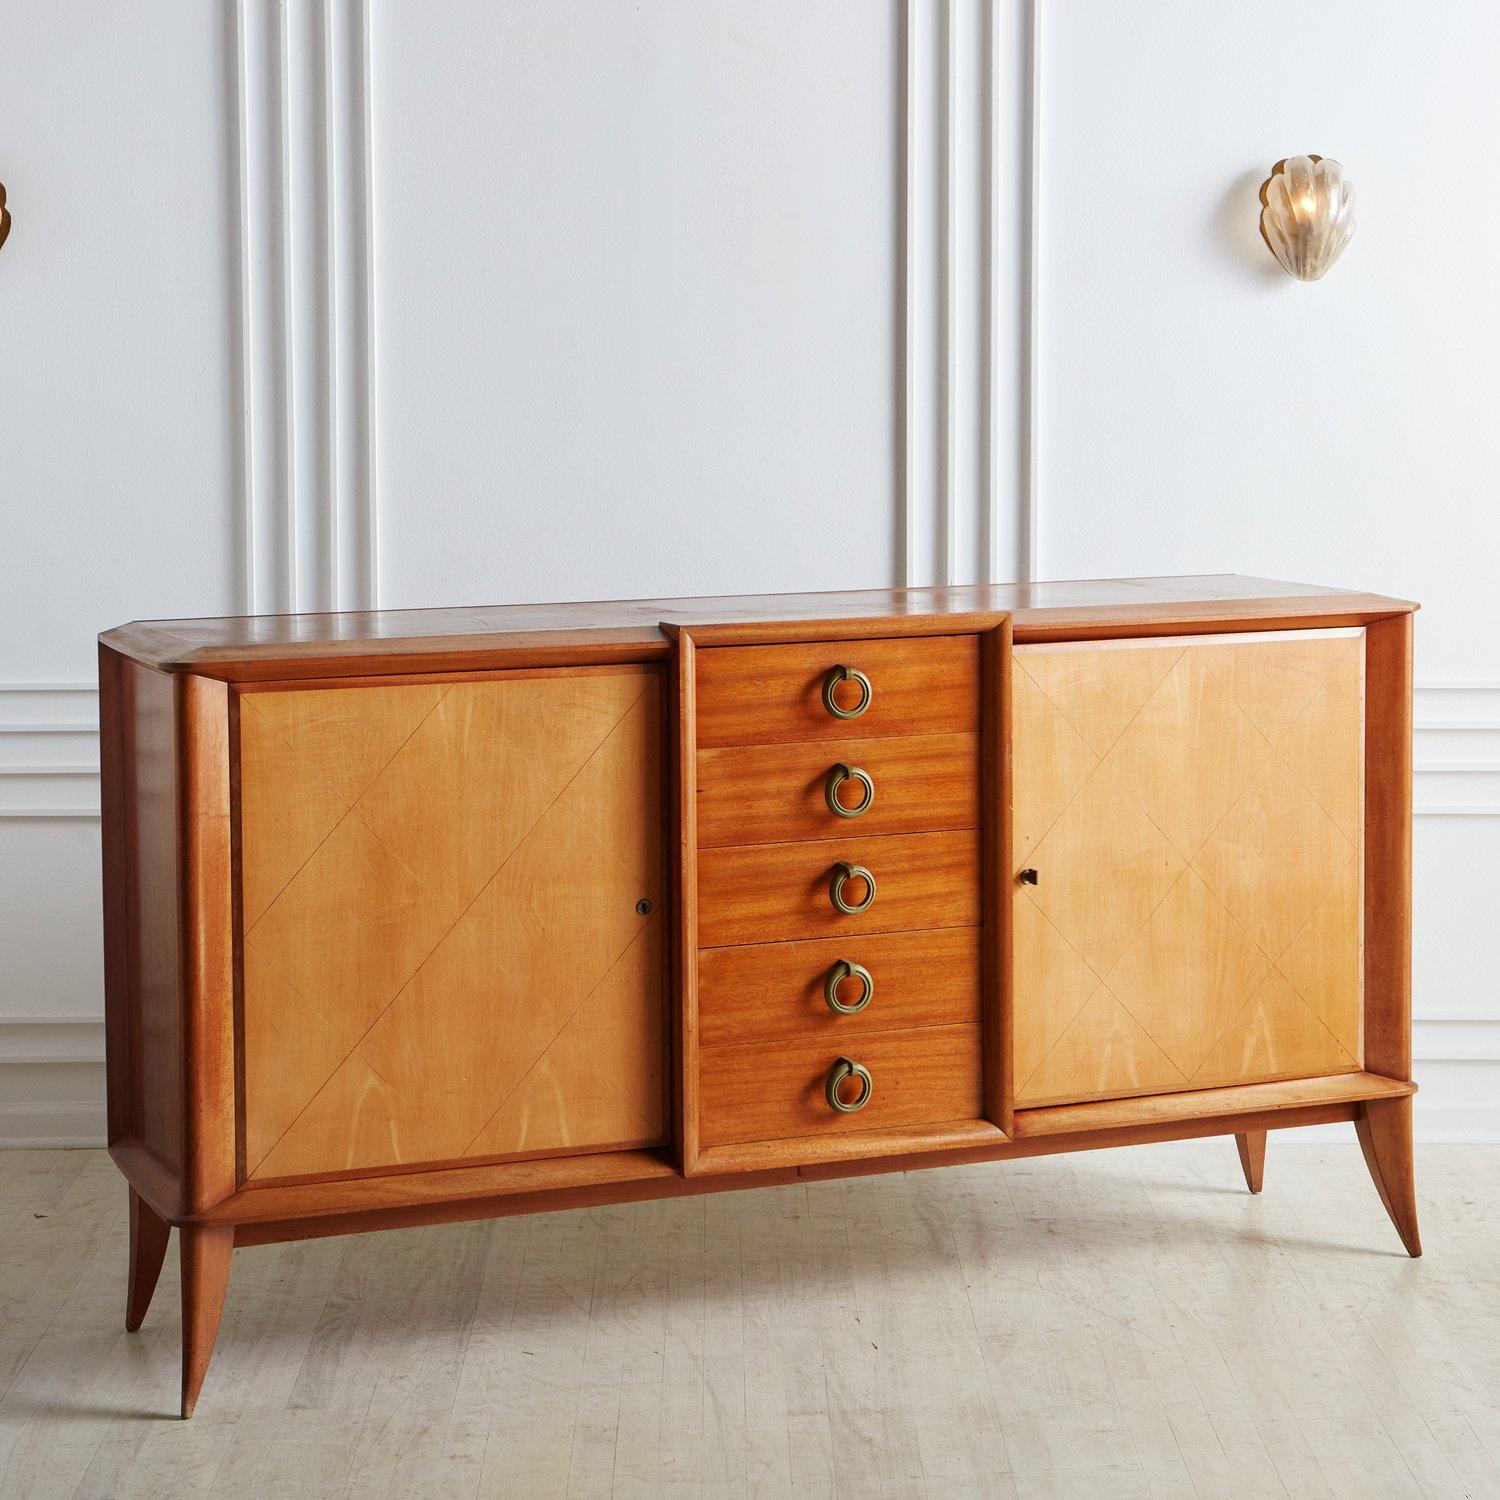 A gorgeous large scale credenza constructed with bleached mahogany featuring two birch doors with a subtle incised harlequin pattern. Each door opens to reveal one adjustable shelf with ample storage space. This piece has five center cherry wood